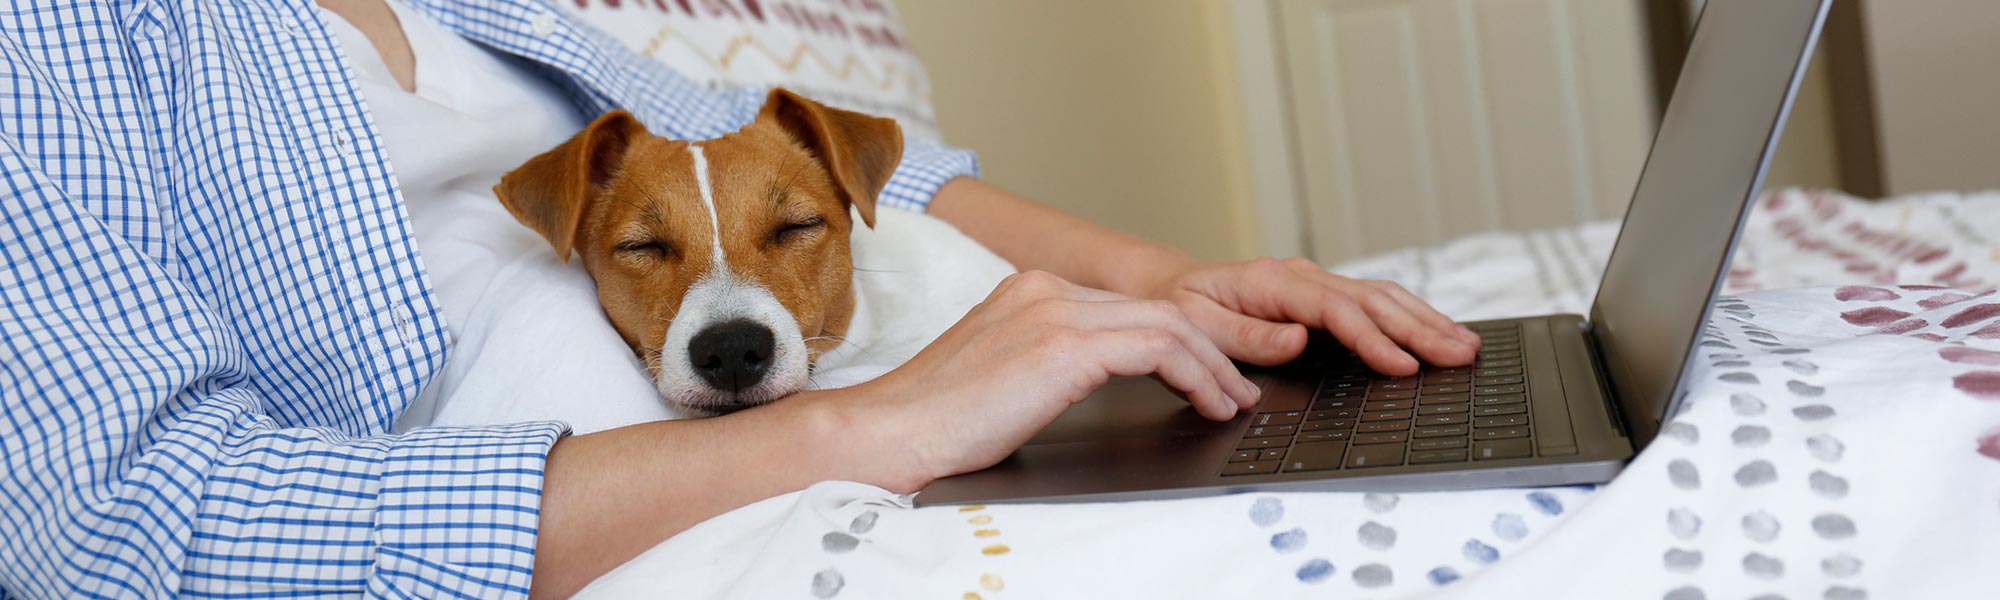 Dog With Owner On Computer